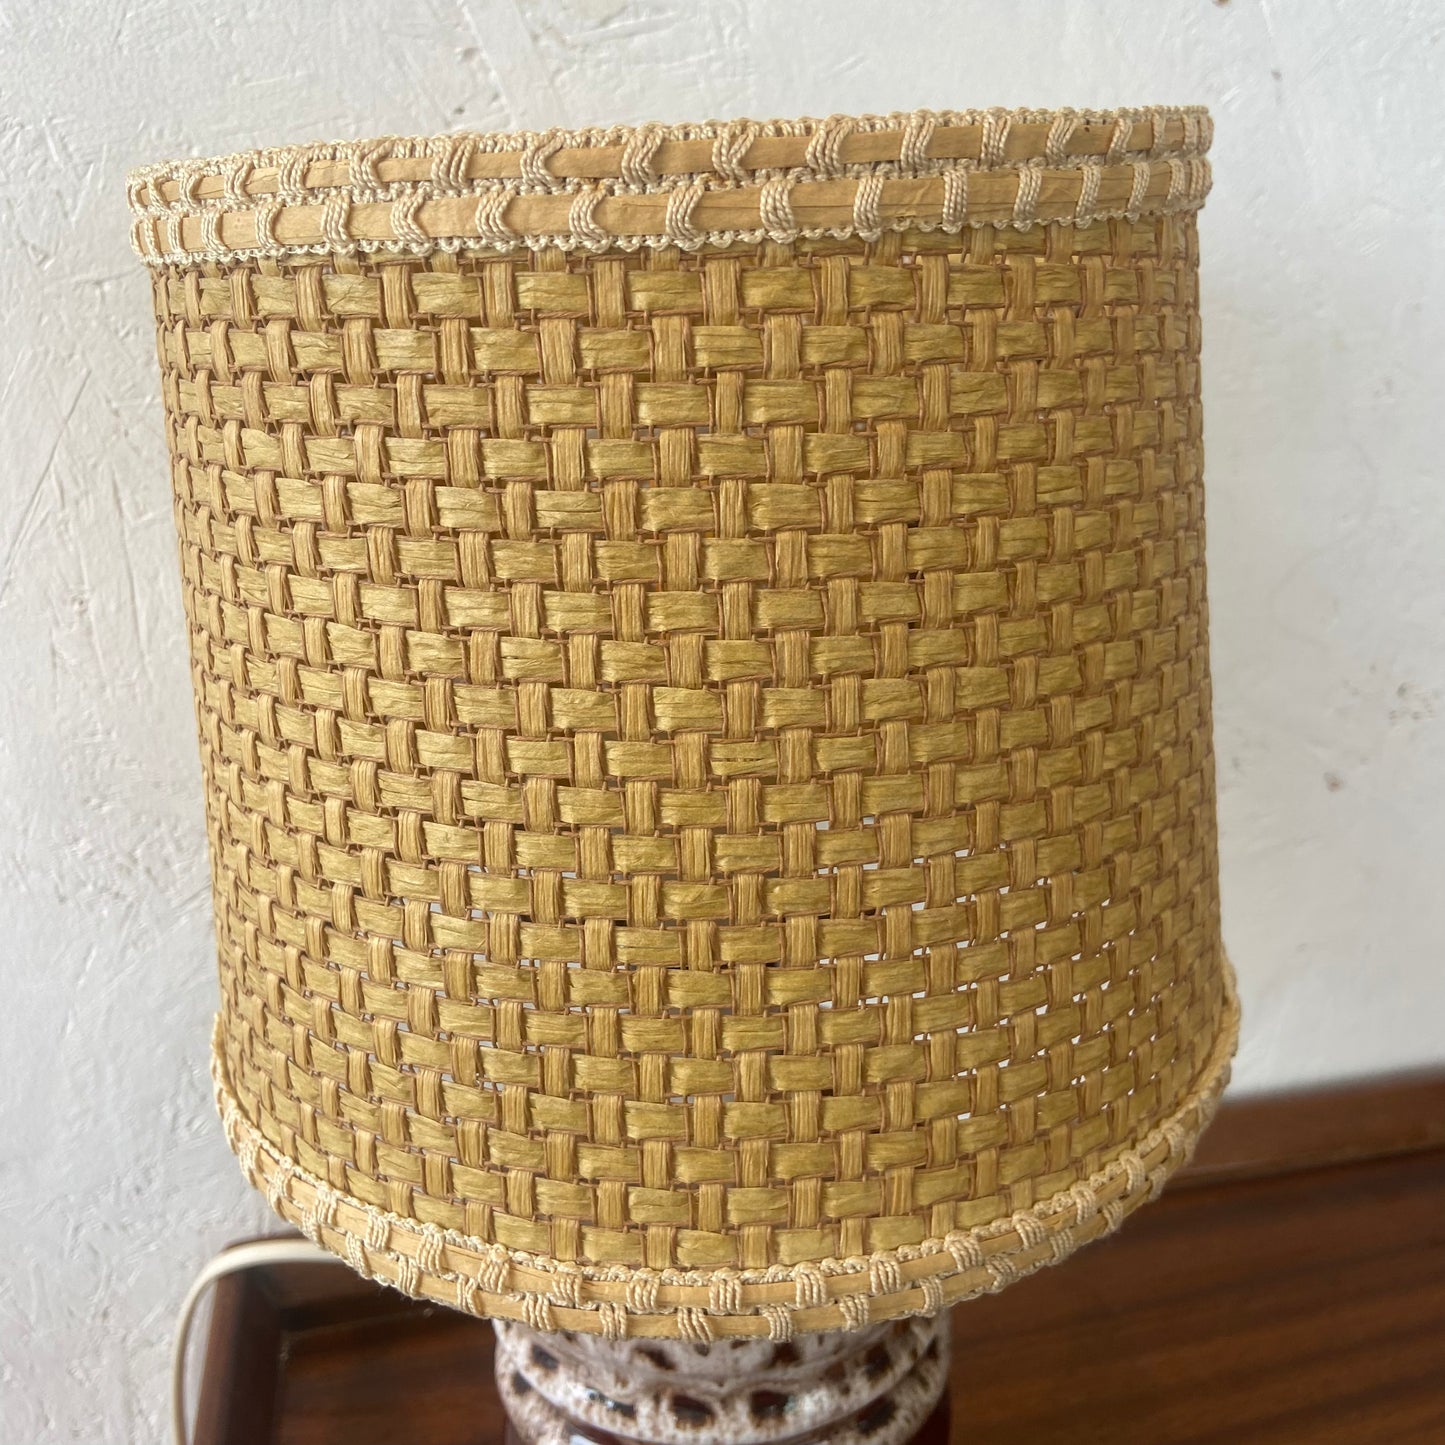 Vintage Fat Lava Style Table Lamp with Rattan Shade